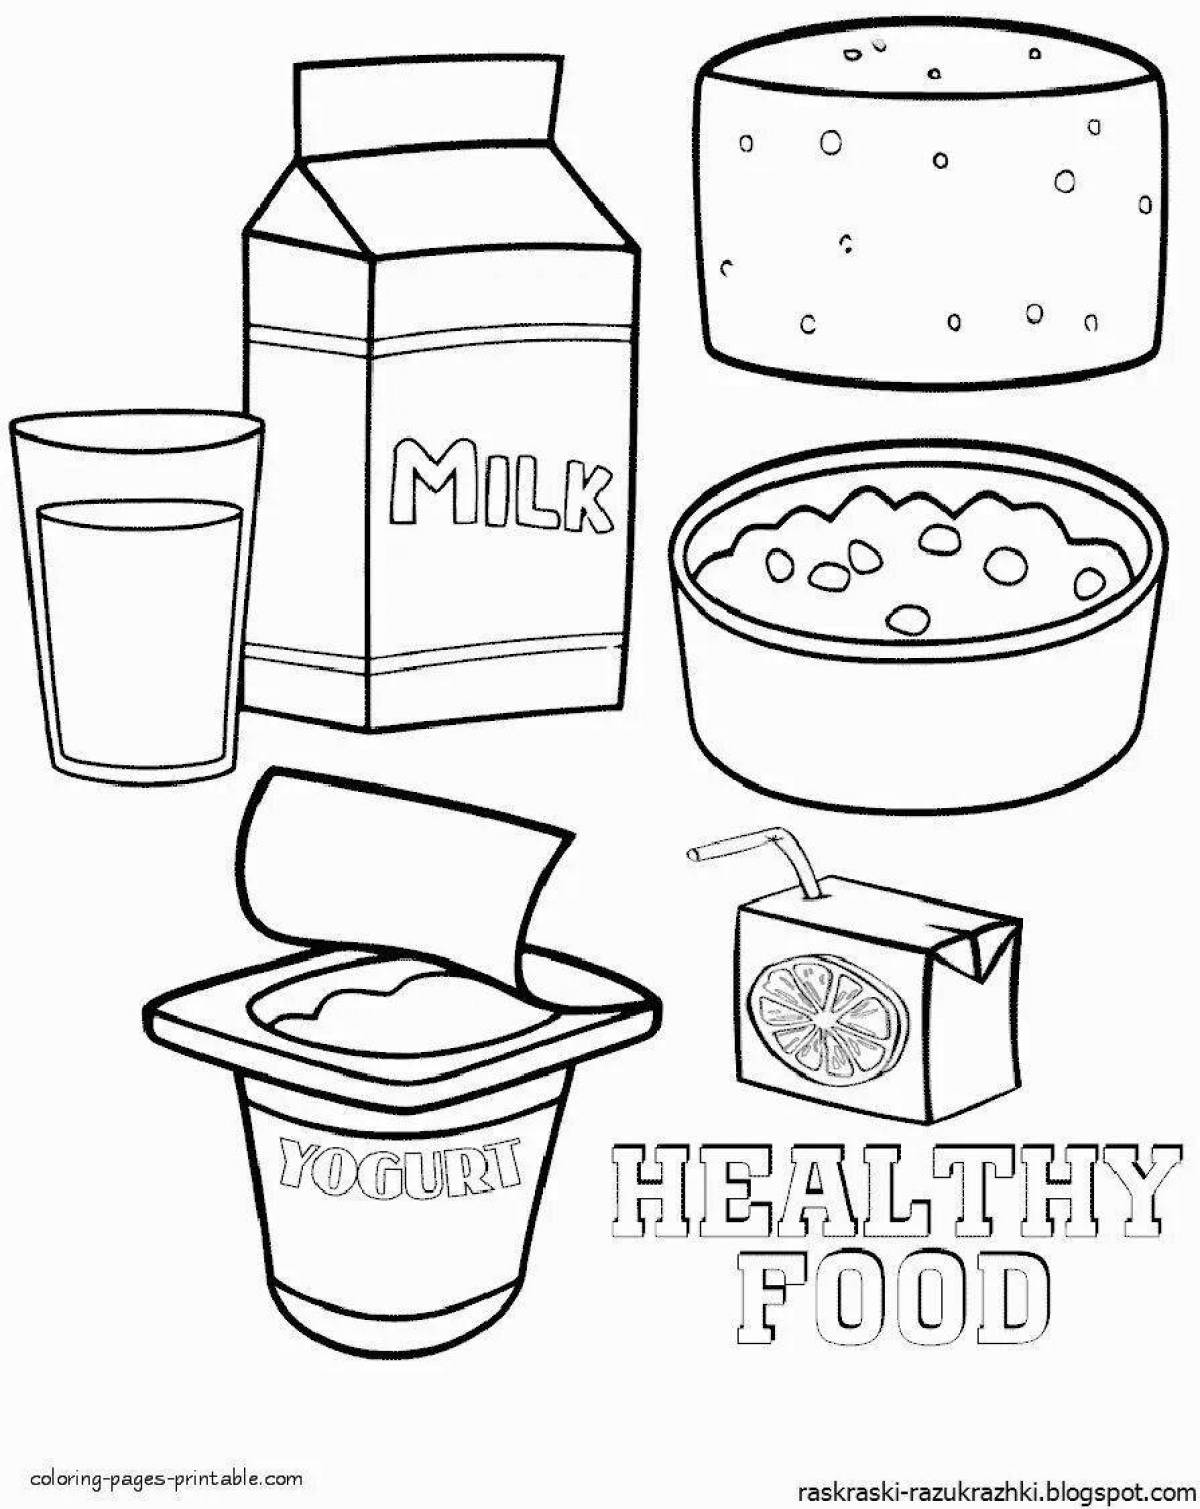 Attractive ooty food coloring page